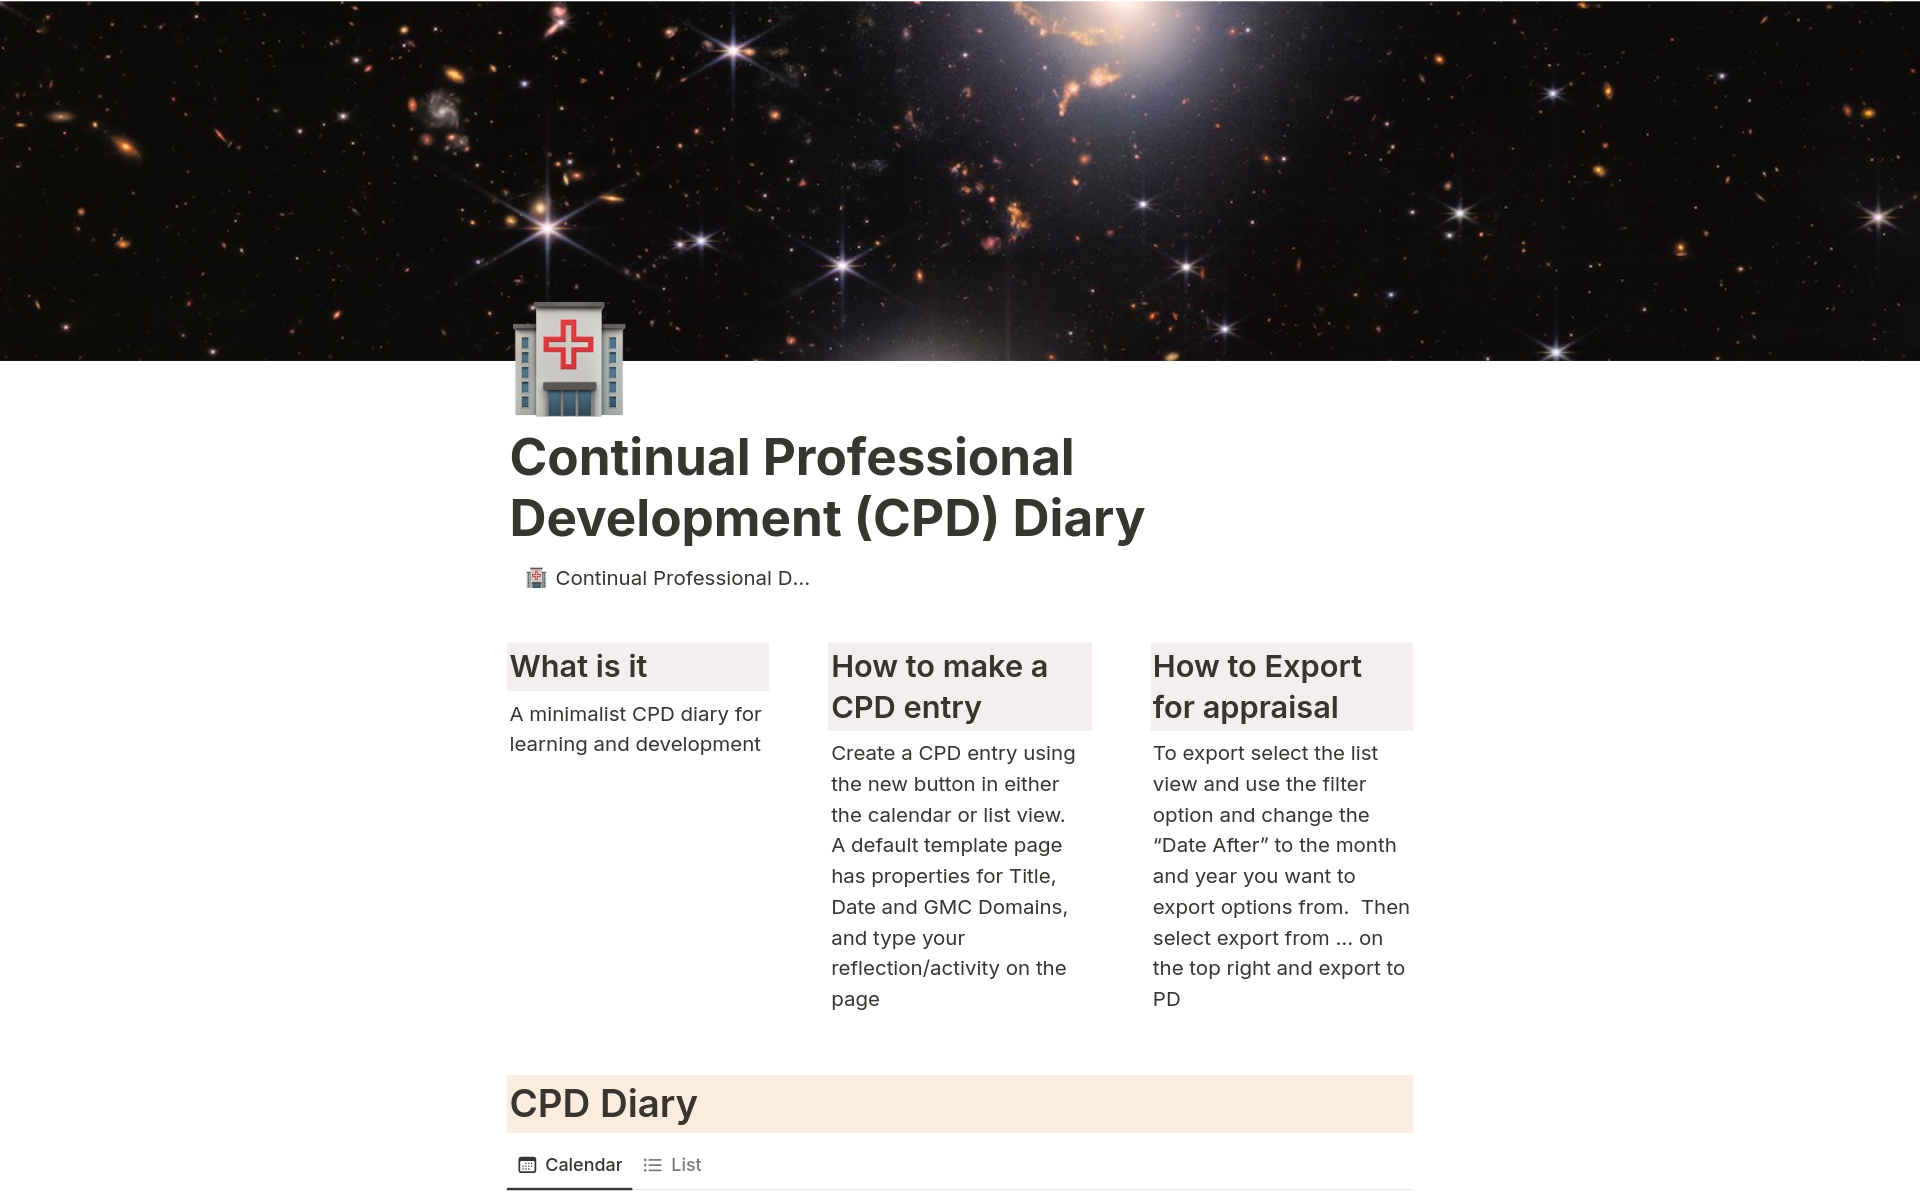 A minimalist diary for continuing professional development.  Could be used for example to log learning by medical professionals on courses.